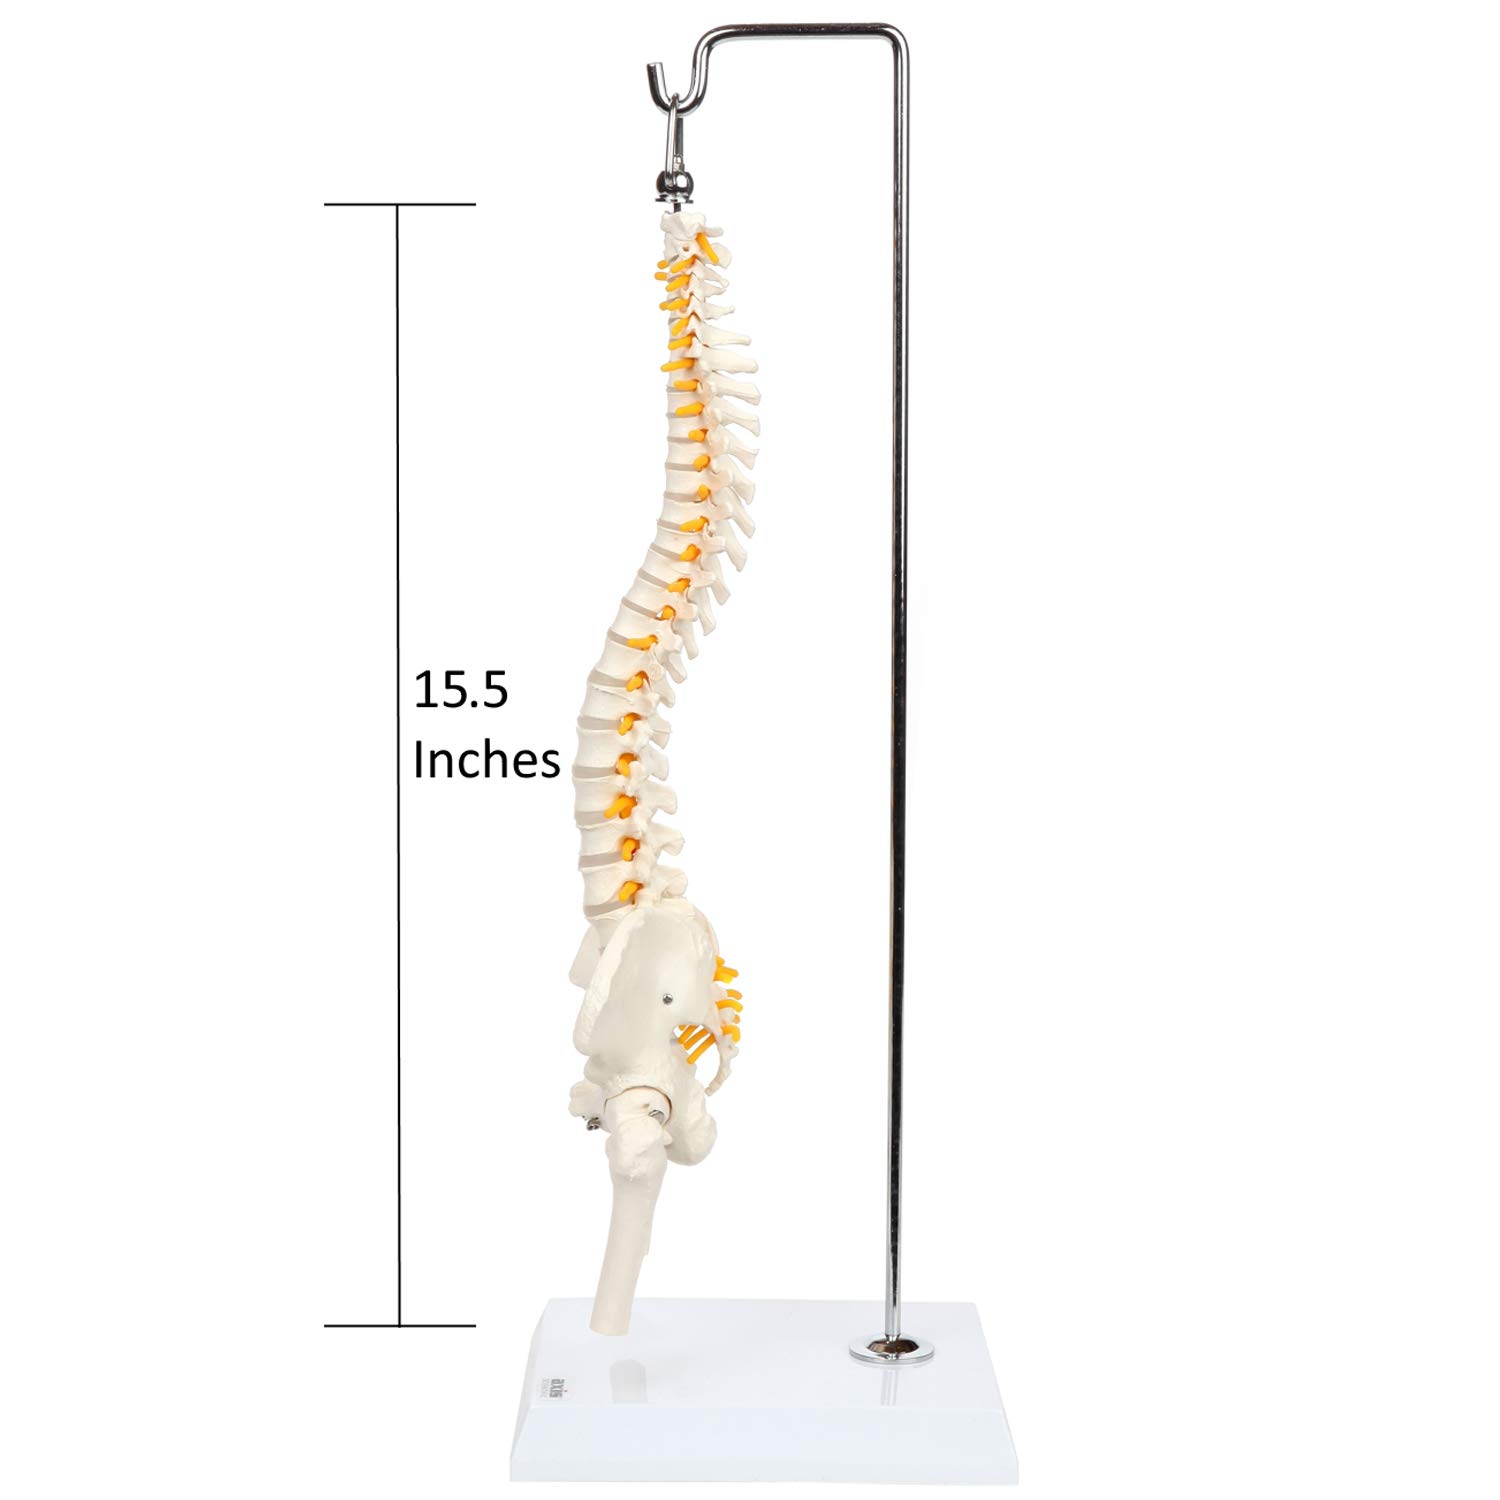 Axis Scientific 15.5" Mini Spine Model with Vertebrae,Nerves,Arteries, Lumbar Column,Male Pelvis - Human Anatomy Model for Education & Study - Includes Stand/Product Manual - Plastic Spine Model